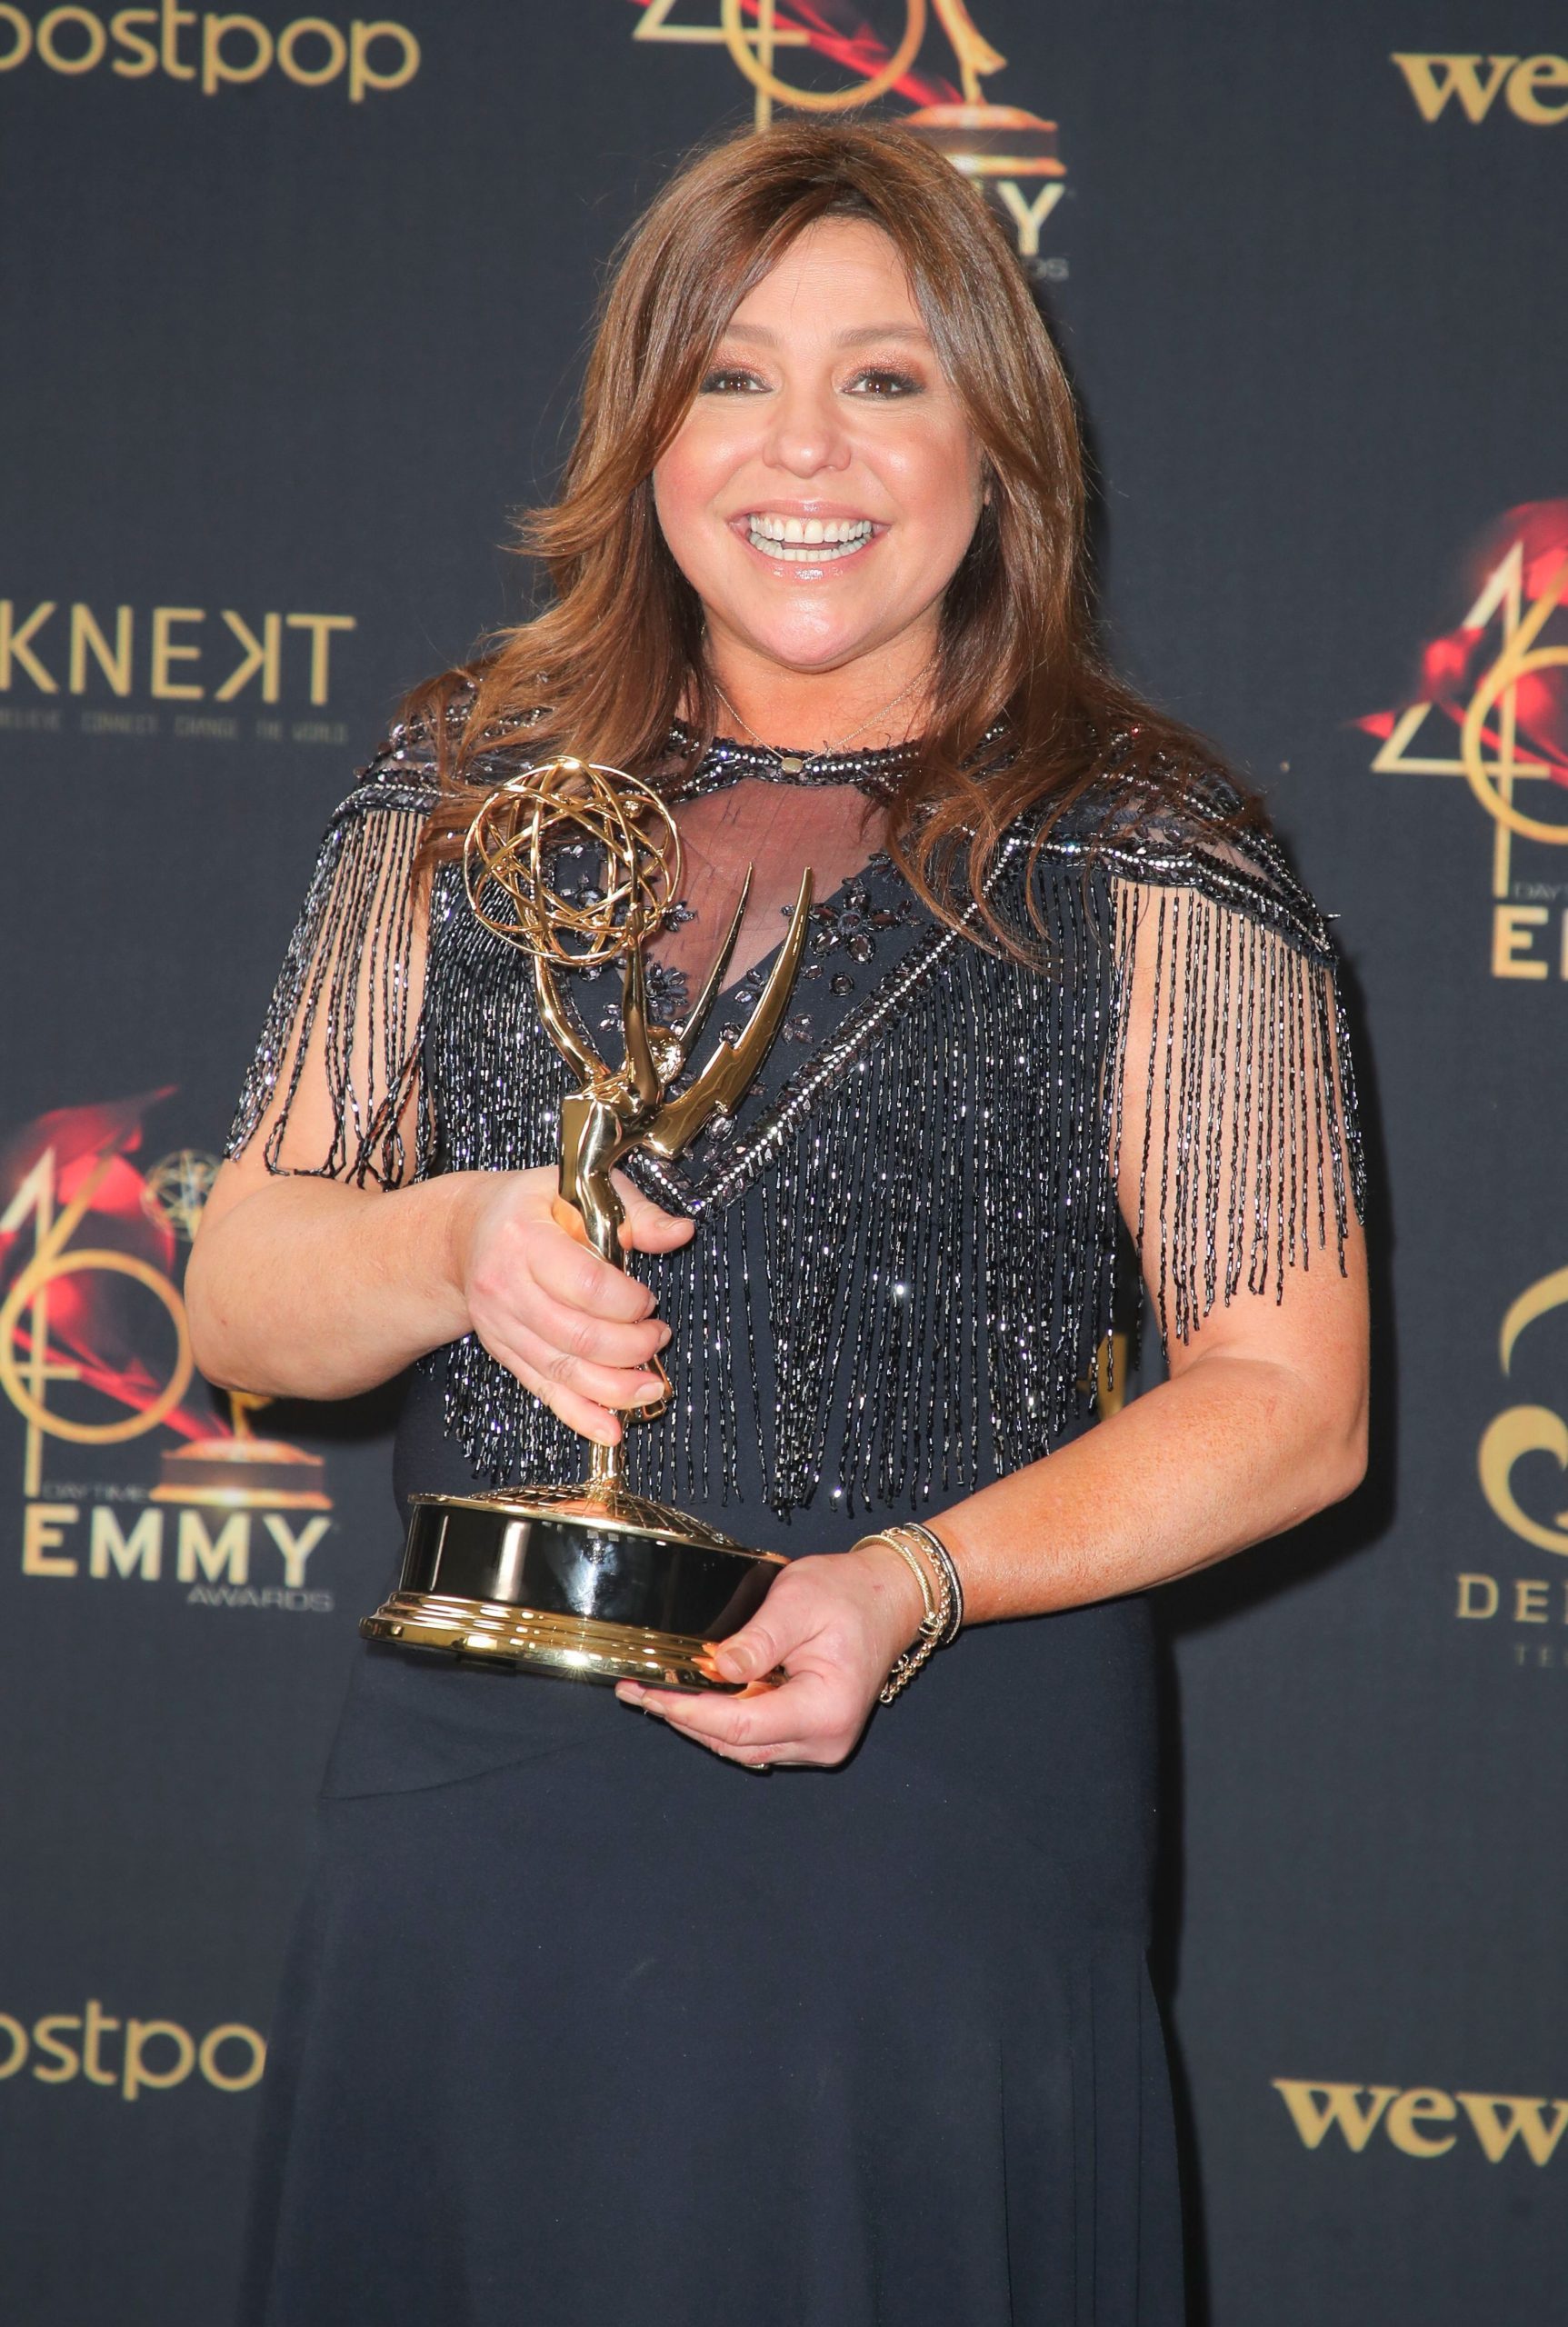 How to book Rachael Ray? Anthem Talent Agency